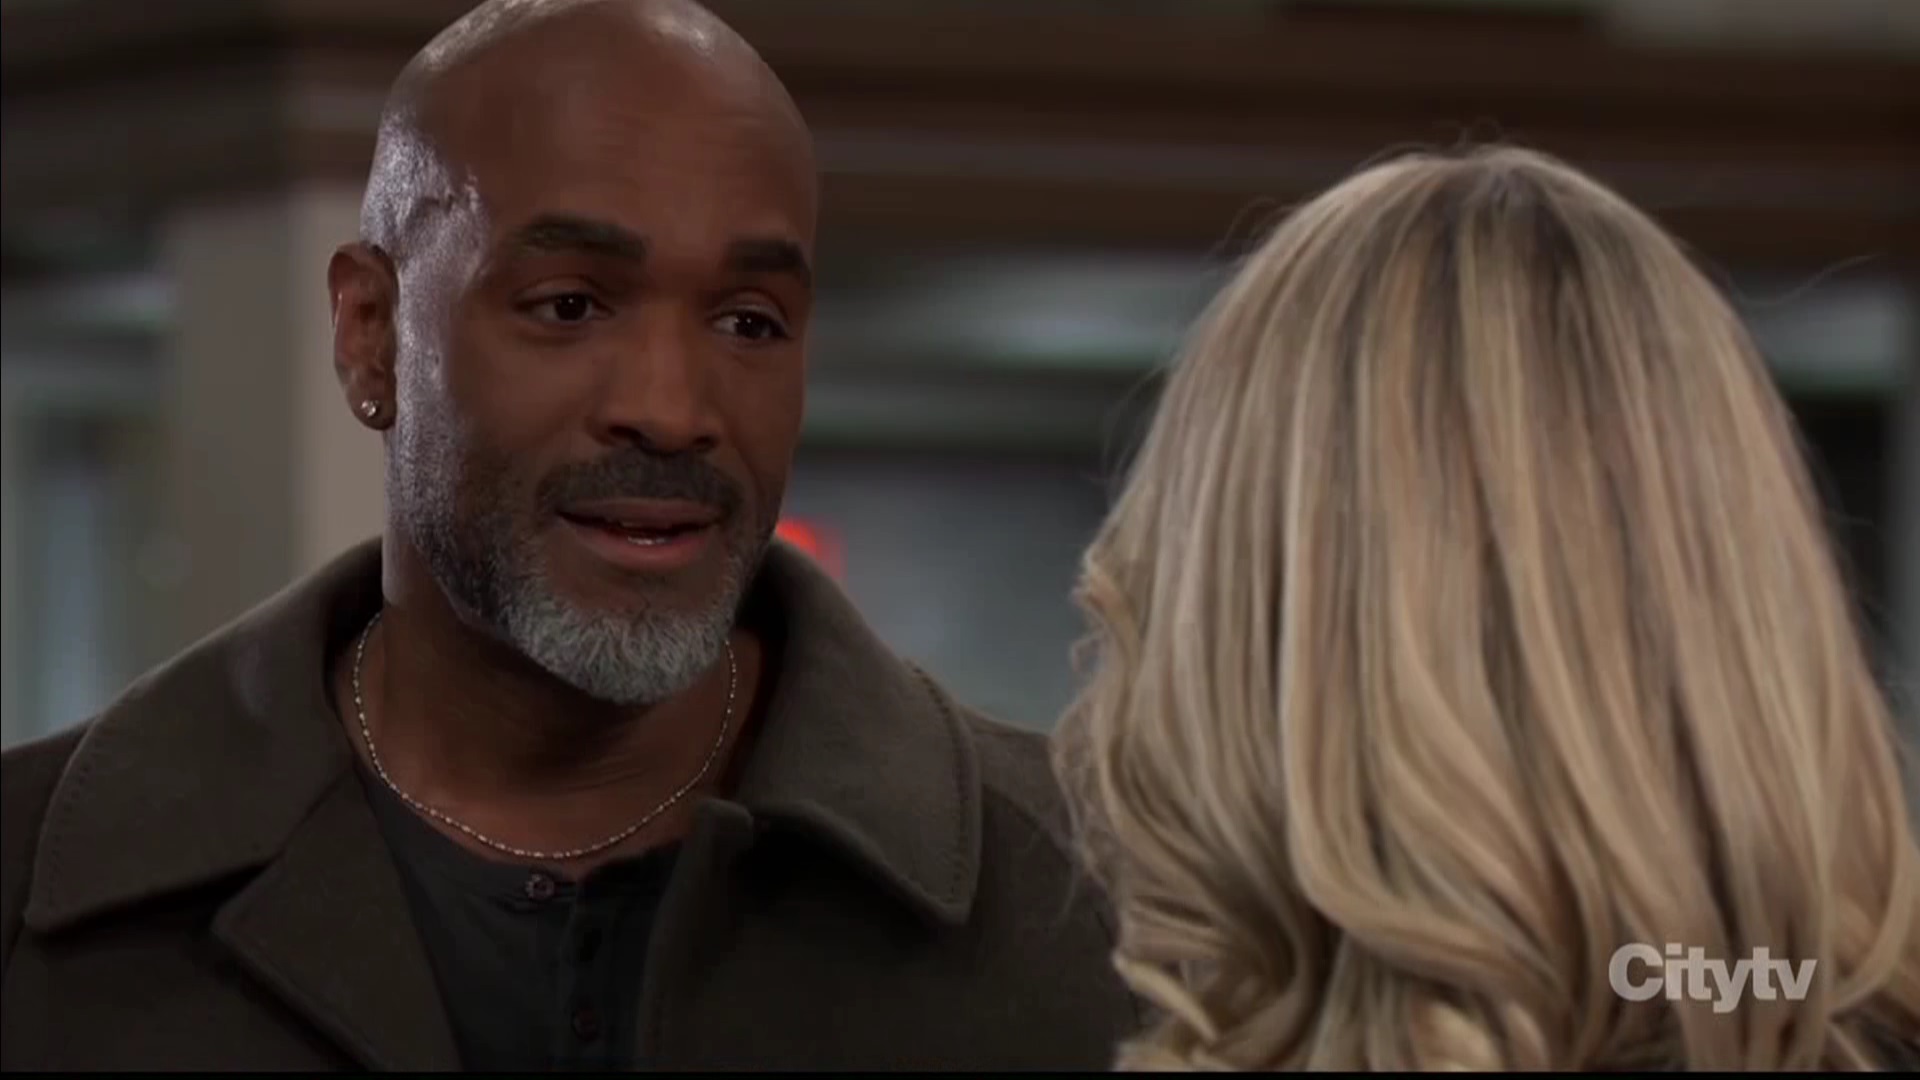 curtis happy for nina GH recaps SoapsSpoilers